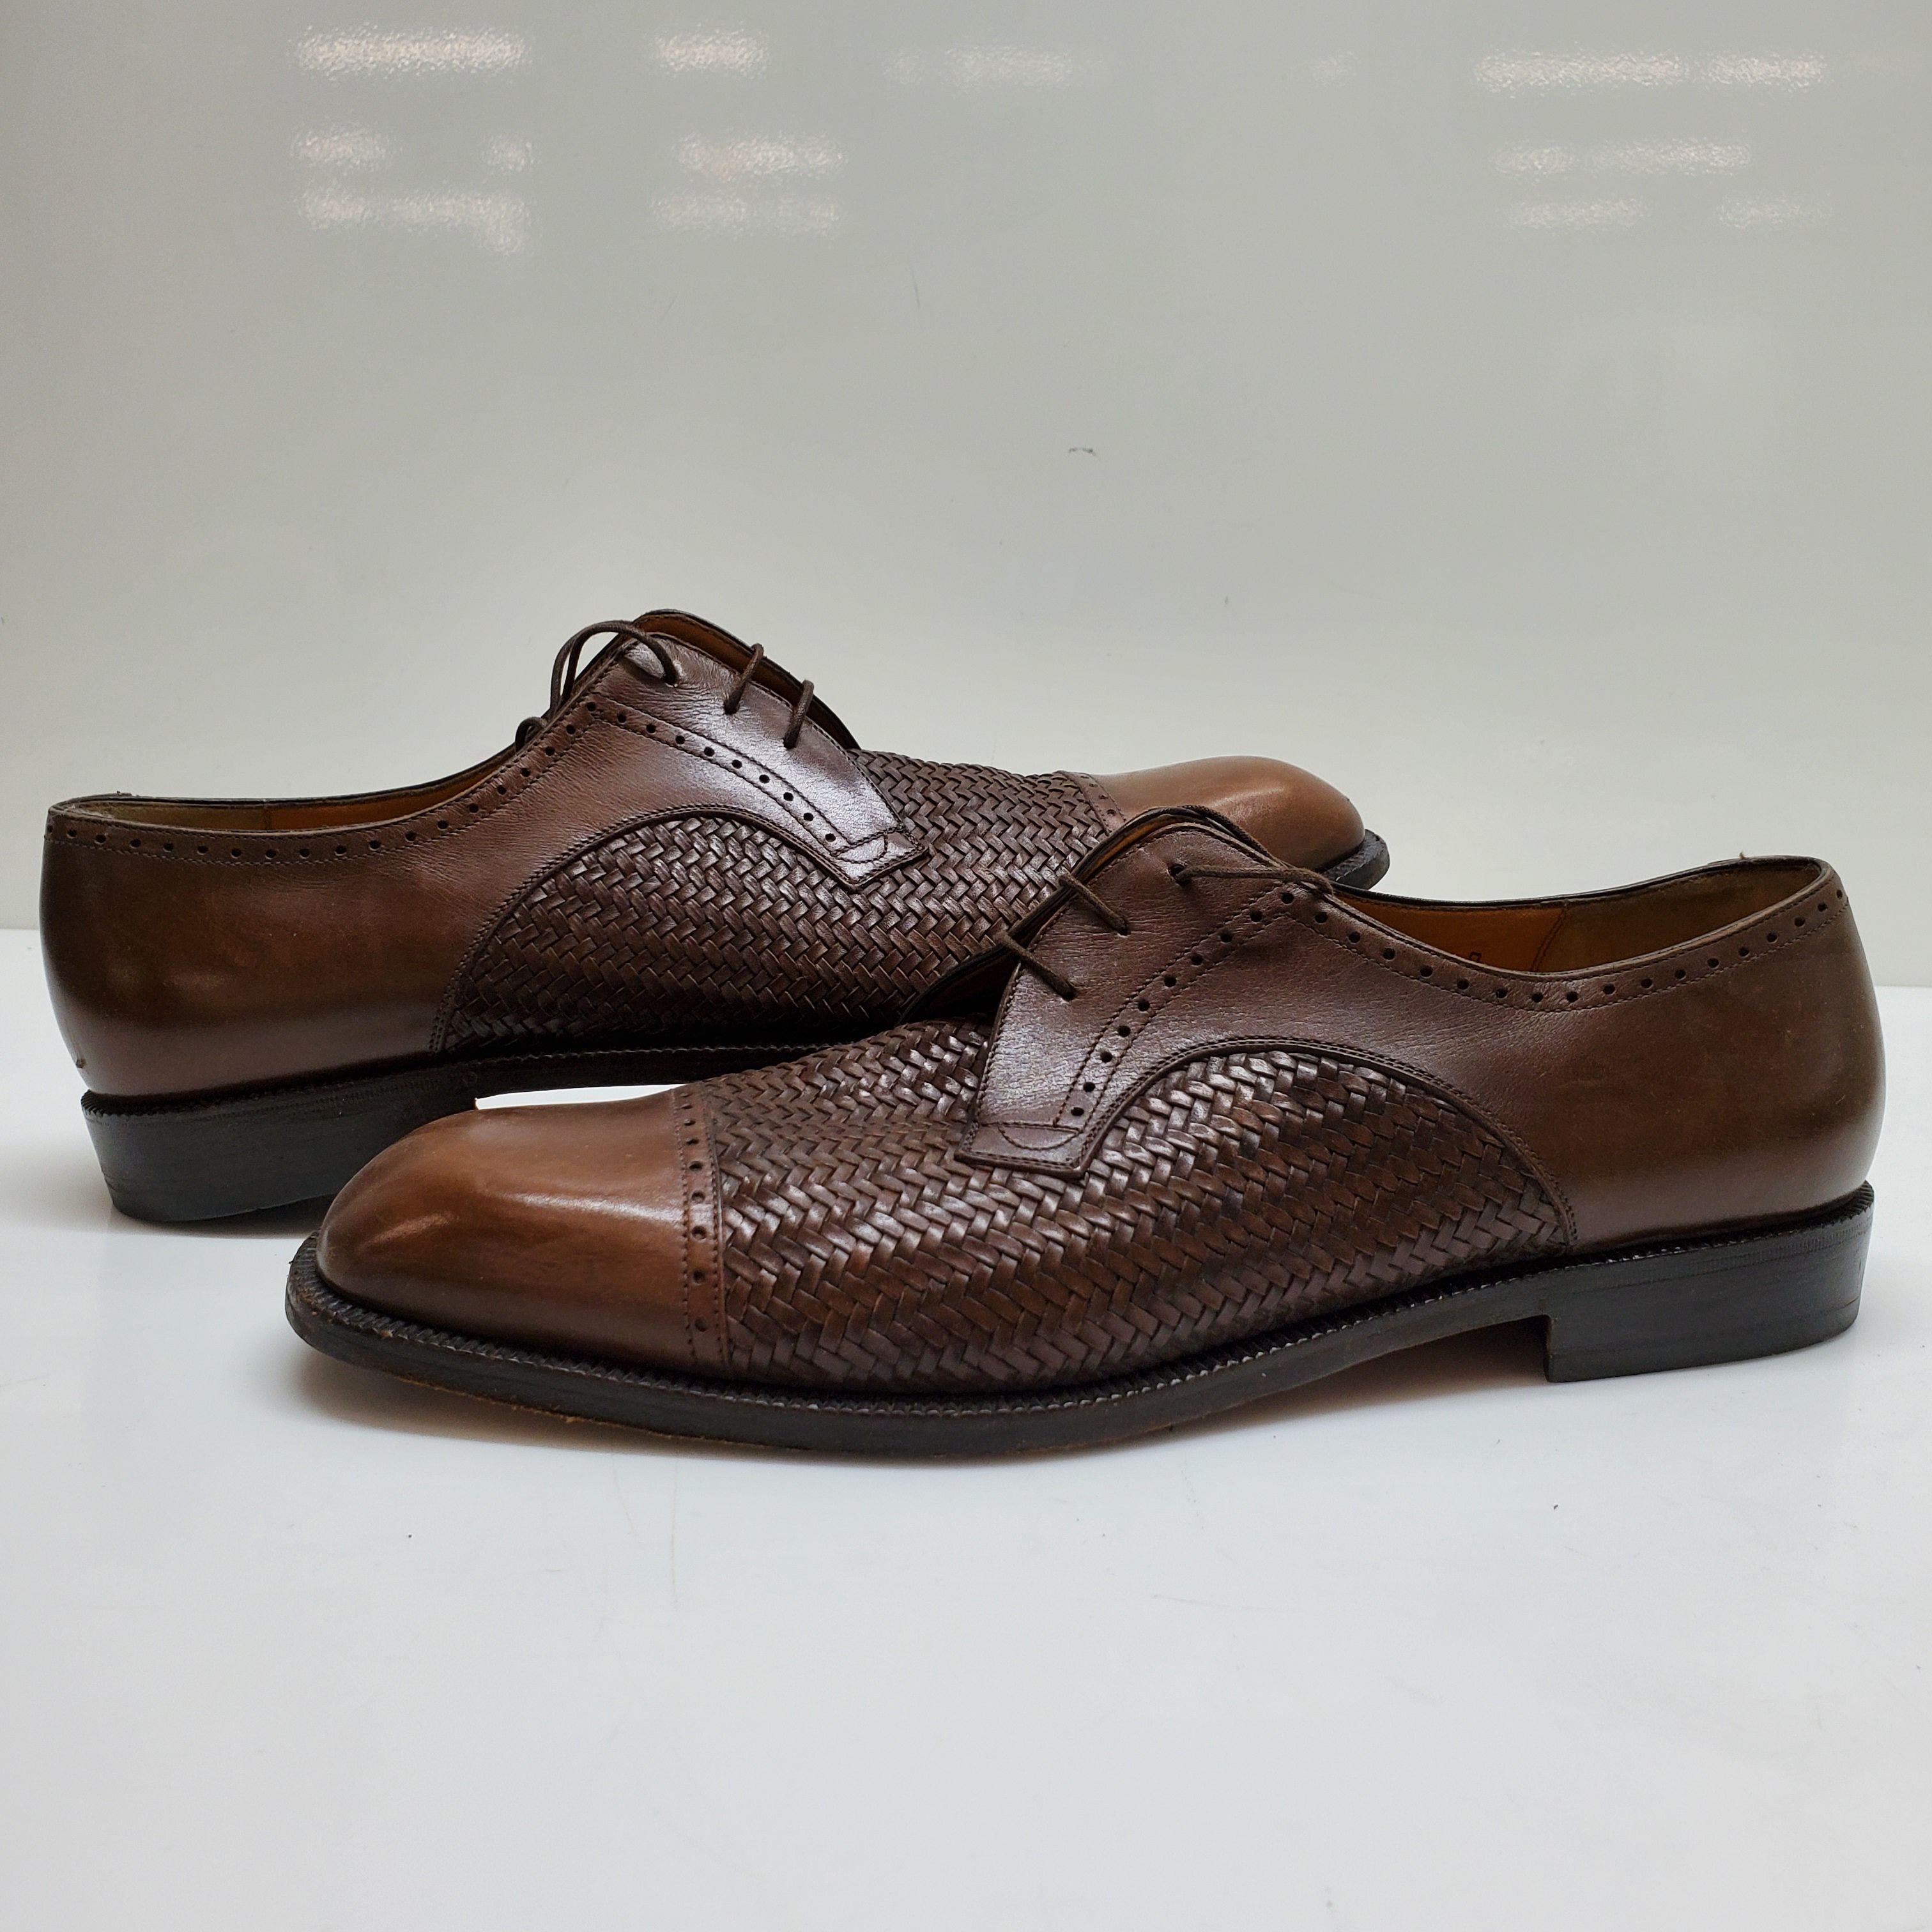 Buy the MENS SALVATORRE FERRAGAMO BROWN LEATHER CAPPED LOAFERS ...